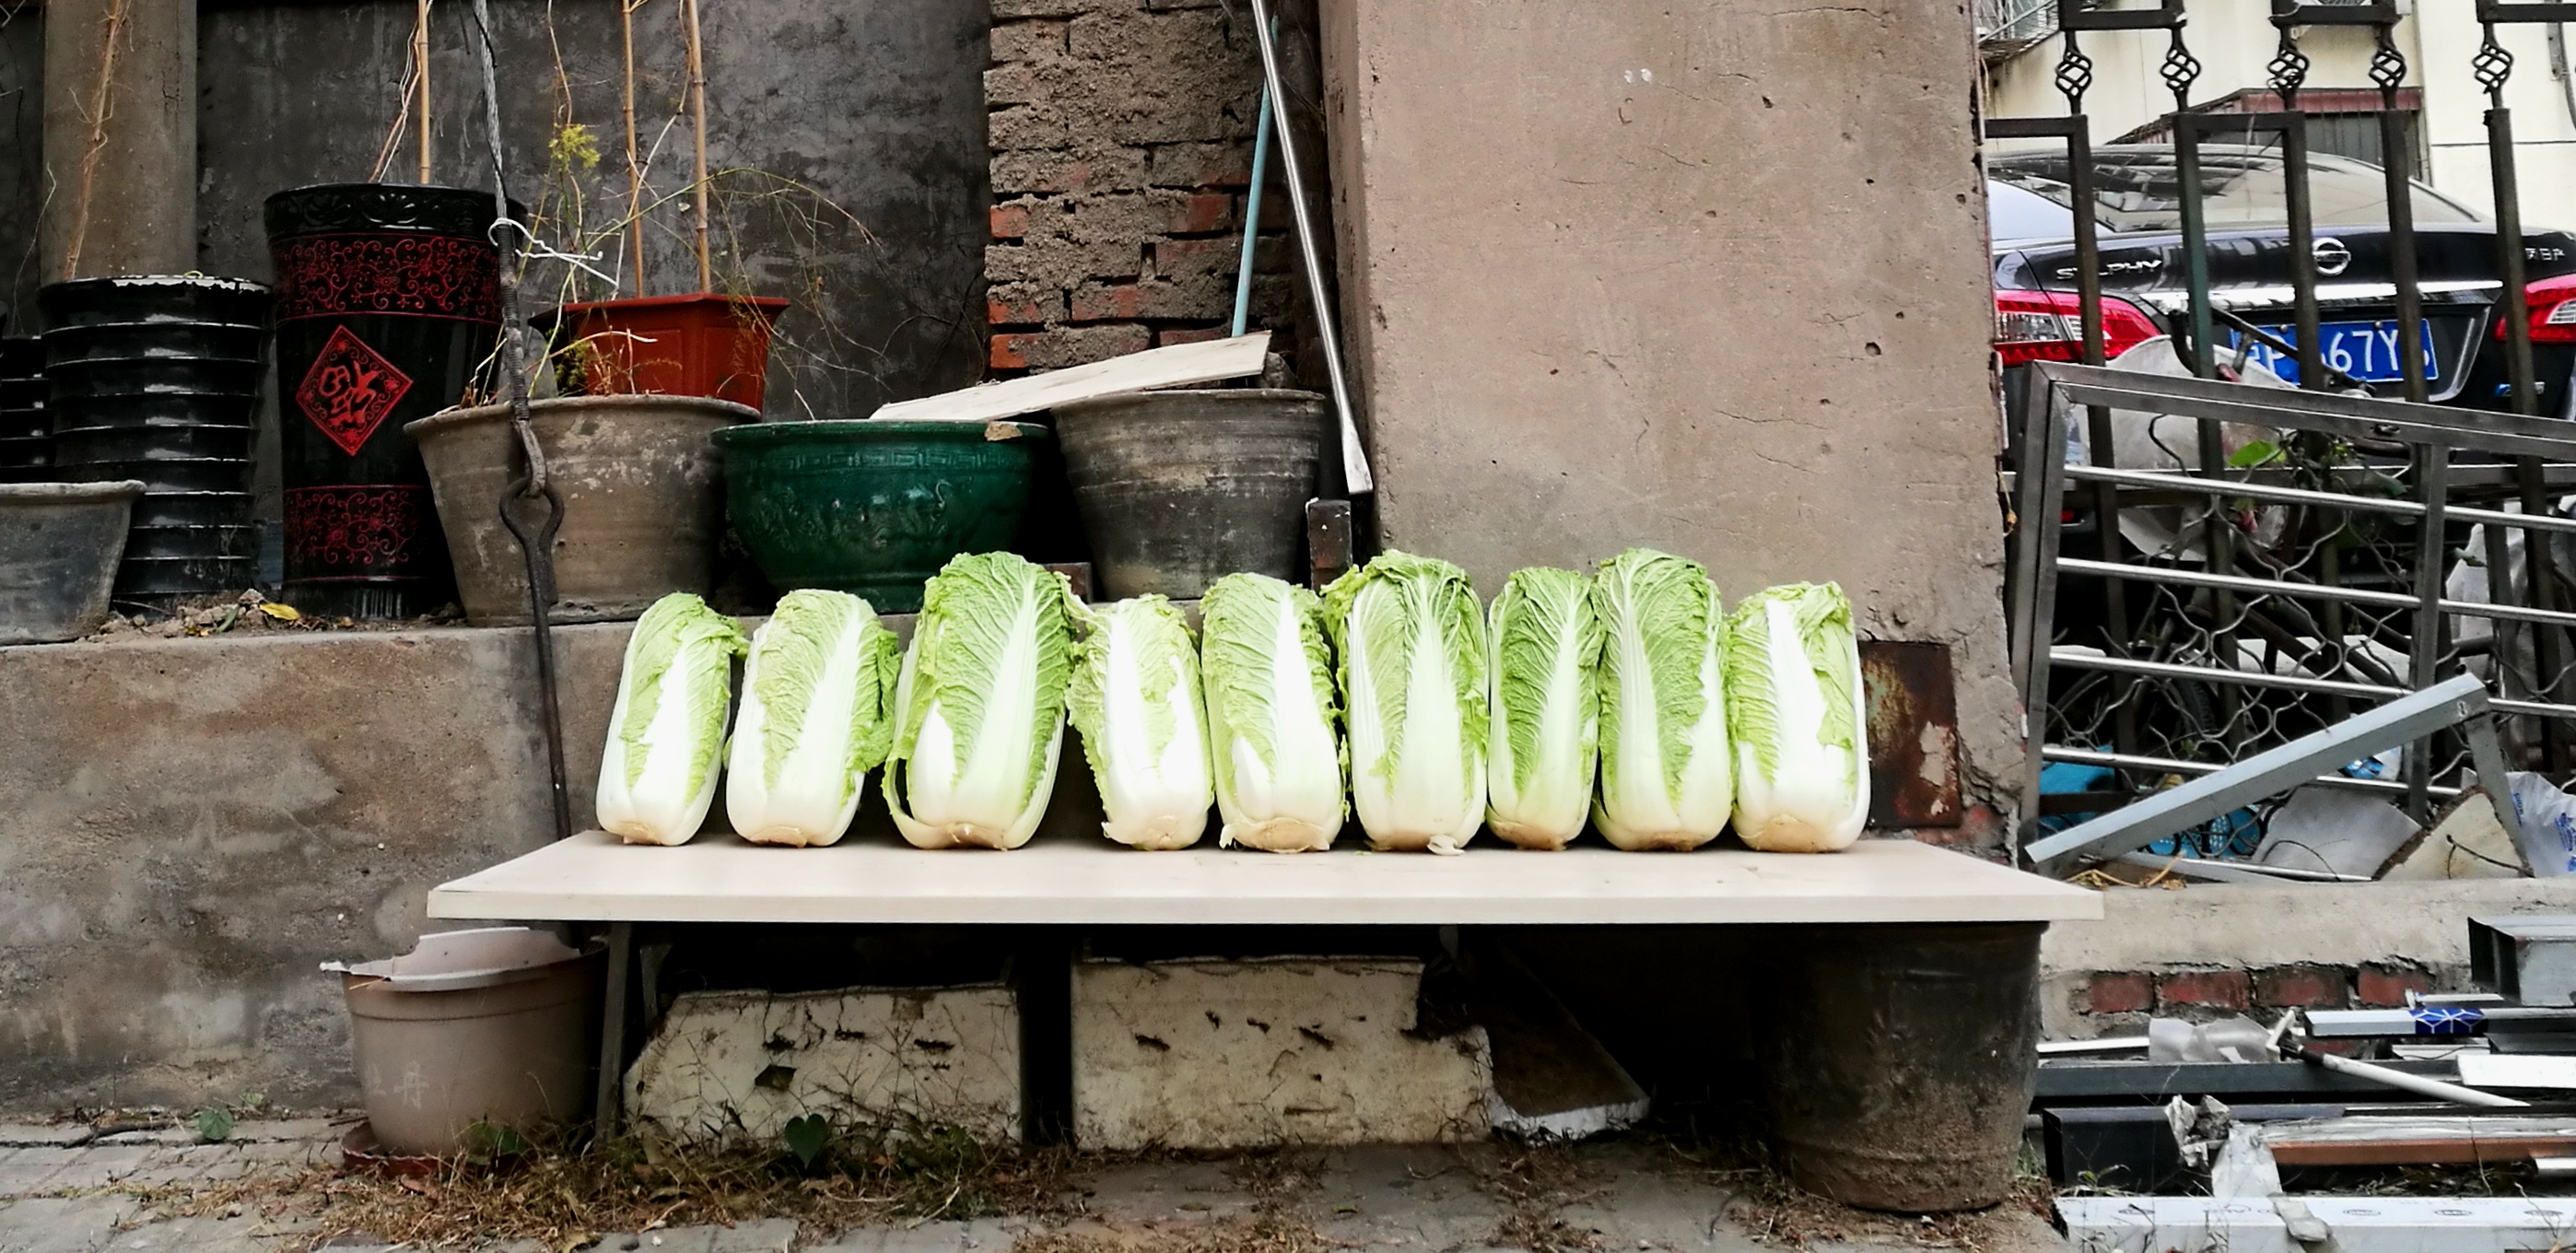 What&#039;s With All the Cabbages? The Significance of Stocking Up on China&#039;s Hardiest Veg Before Winter